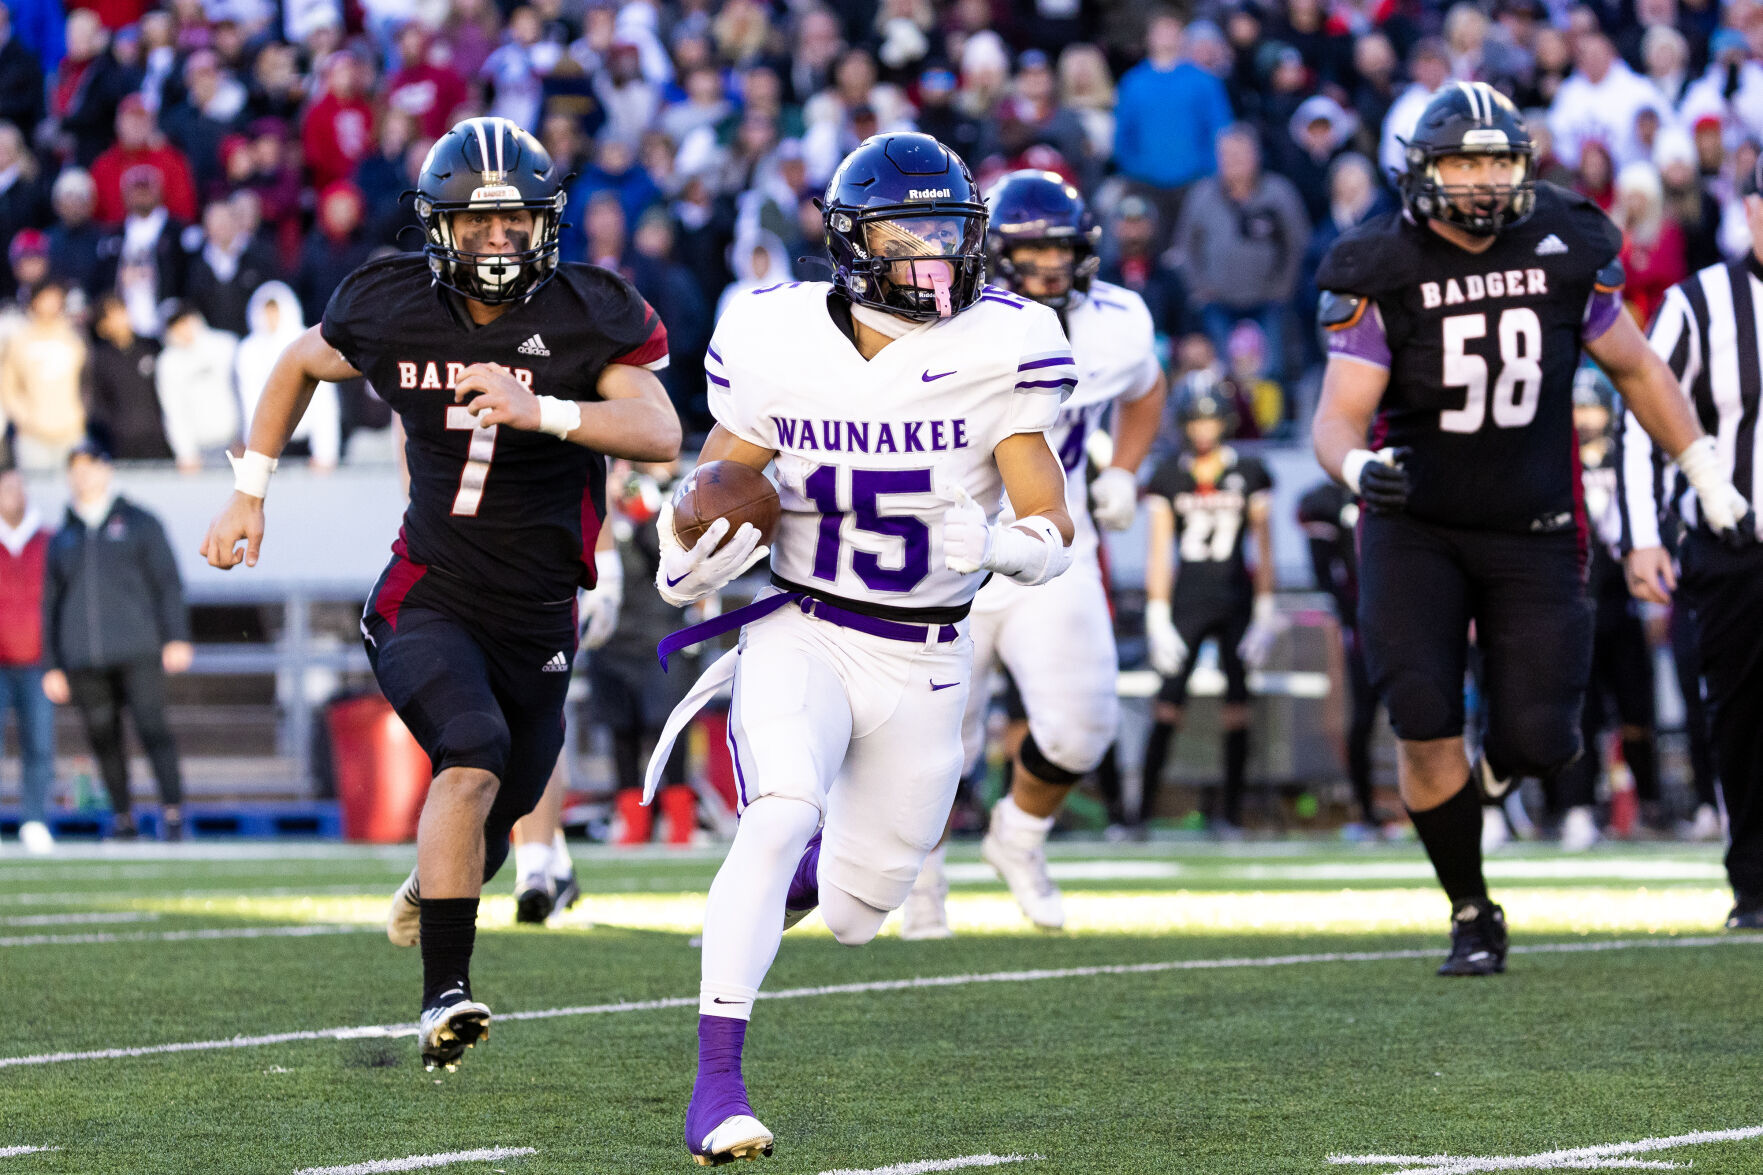 Waunakee Football Falls Short in State Title Quest, Lose to Lake Geneva Badger